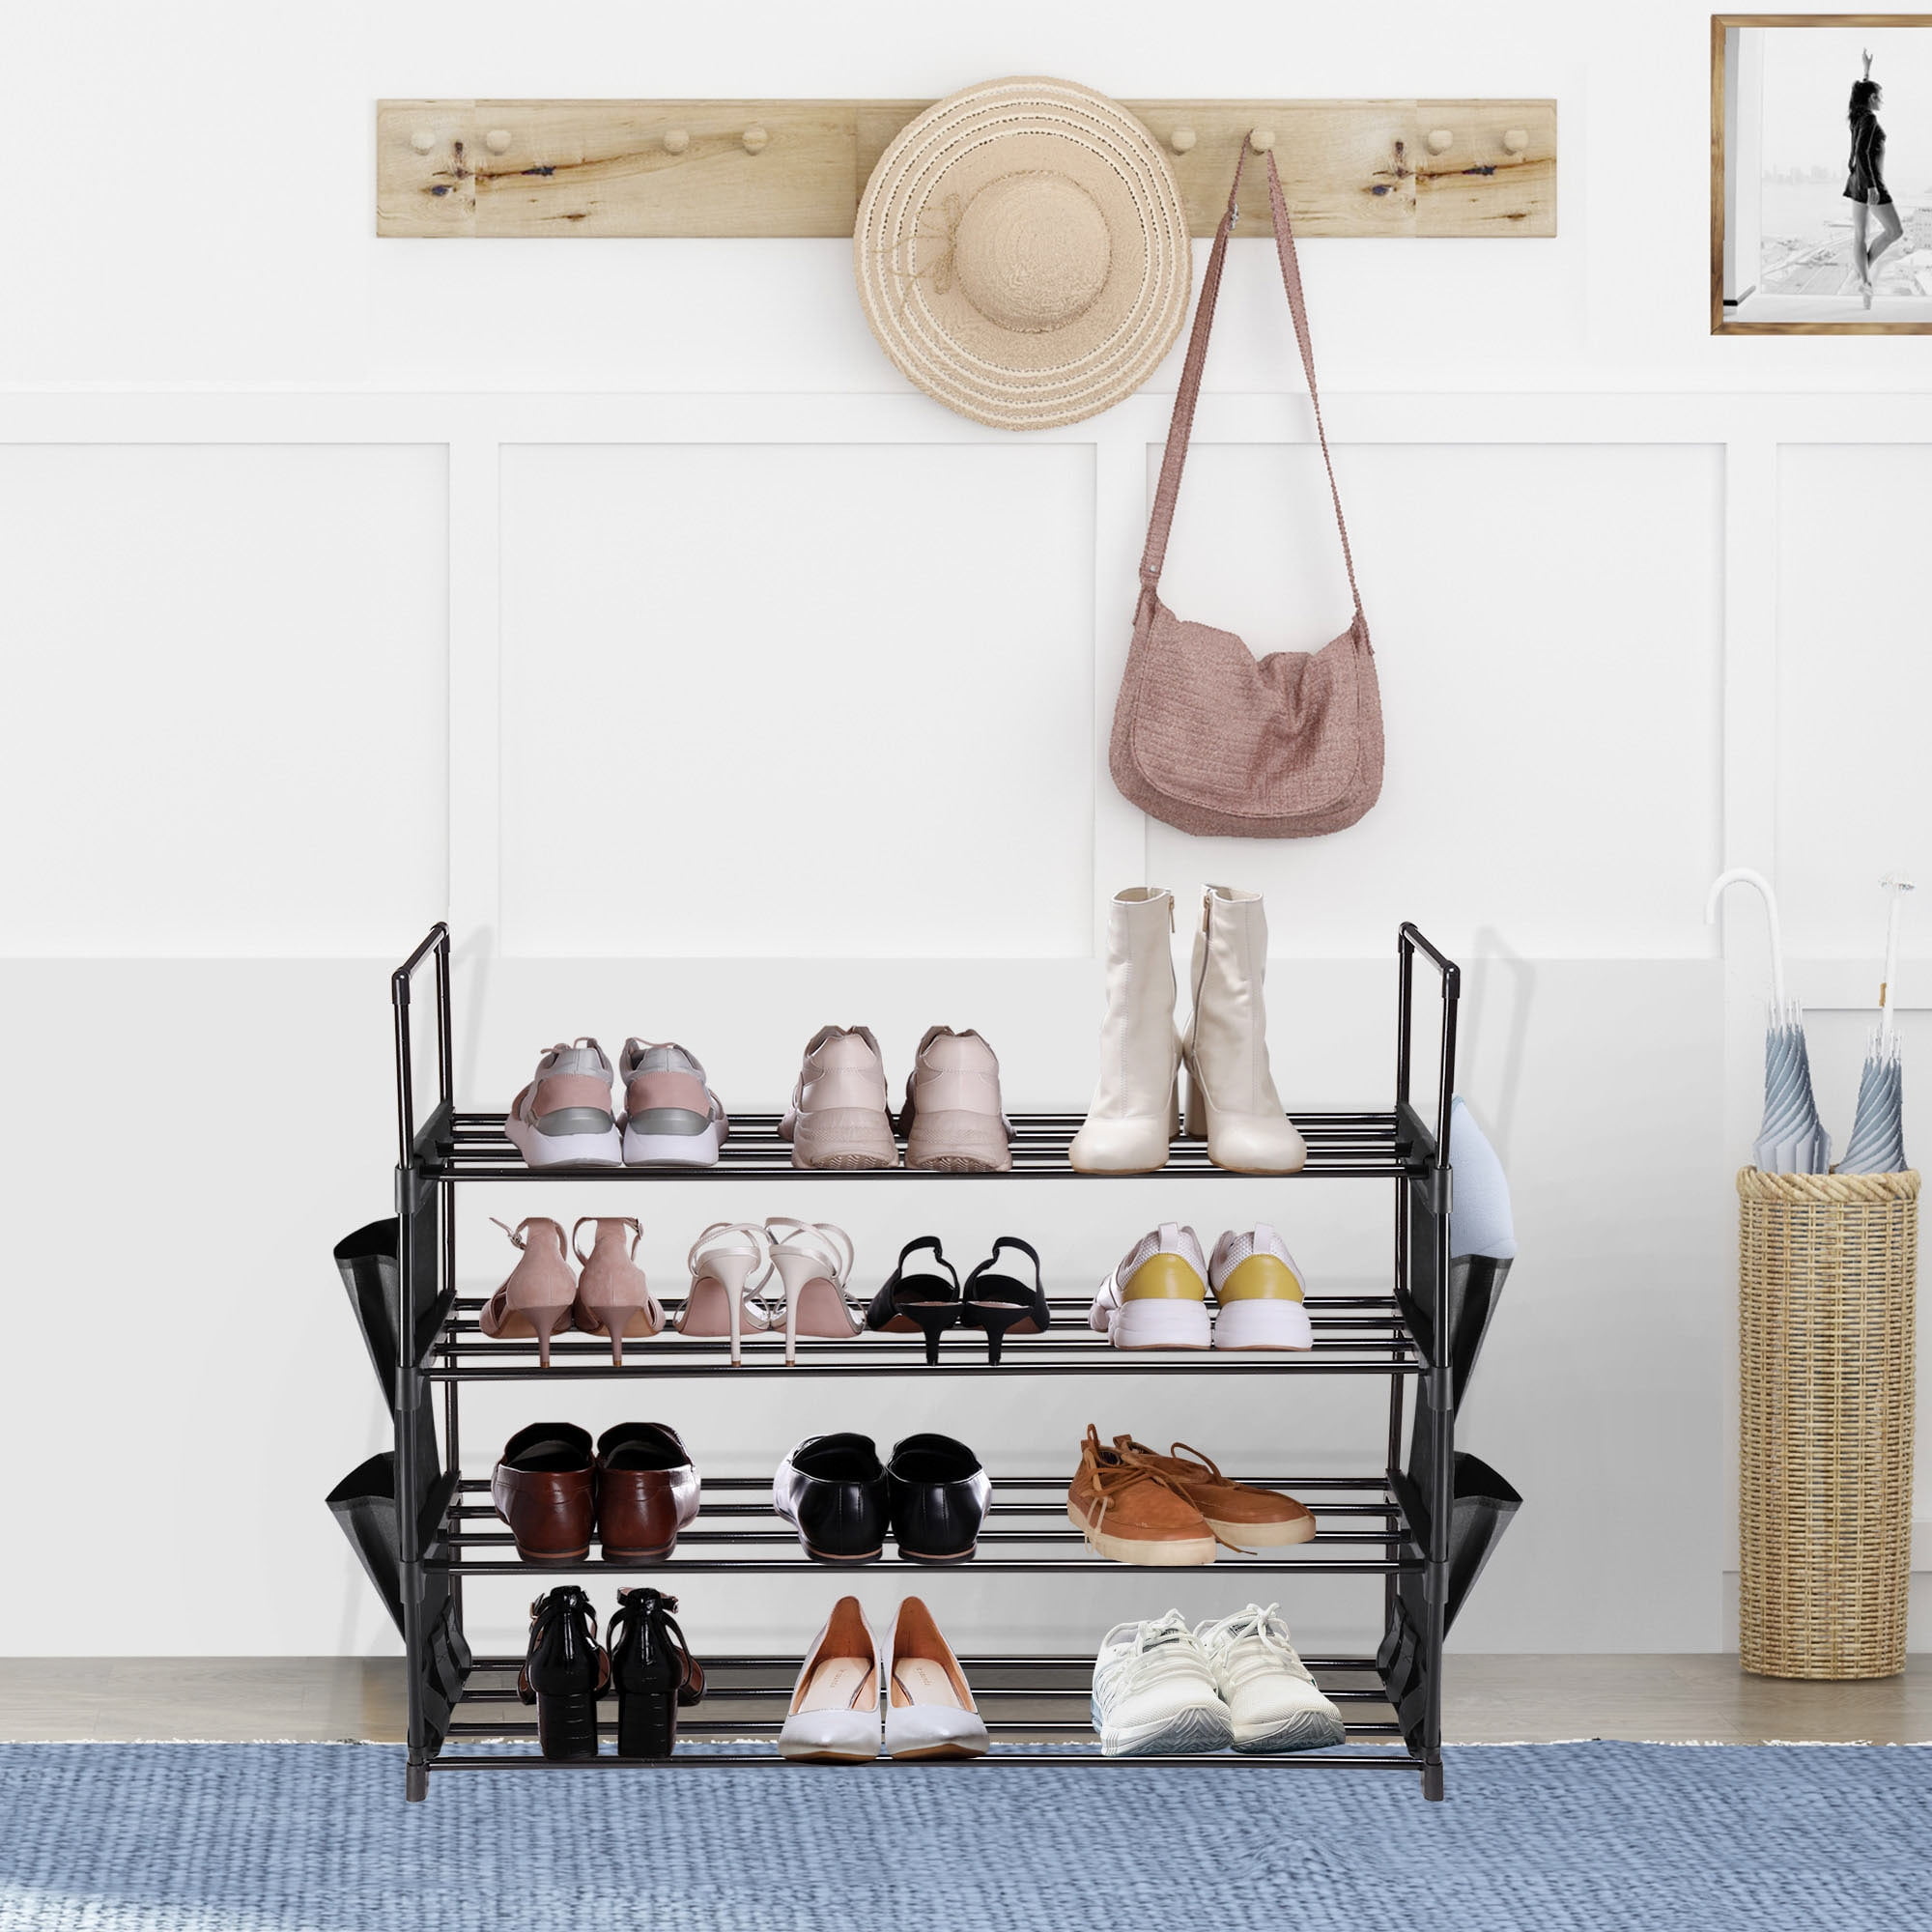 Shoe Rack. Wall Mounted Shoe Storage. High Quality 24or 48. Easy Install.  Hardware Included. Predrilled Holes. Space Saver. 's Pick. 